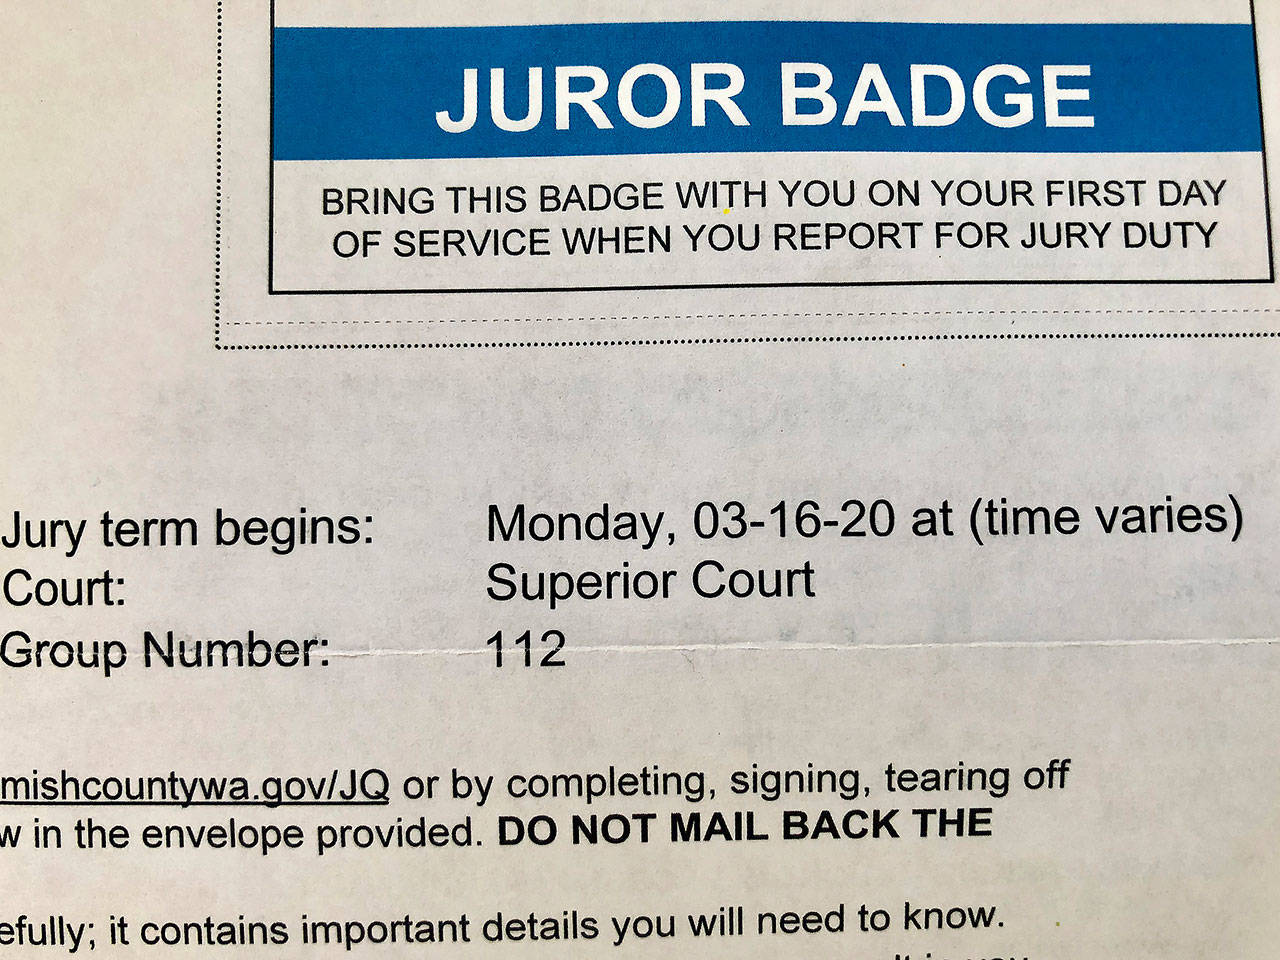 People on jury duty don’t have to report. Many jury trials in Snohomish County are suspended due to COVID-19. (The Daily Herald)